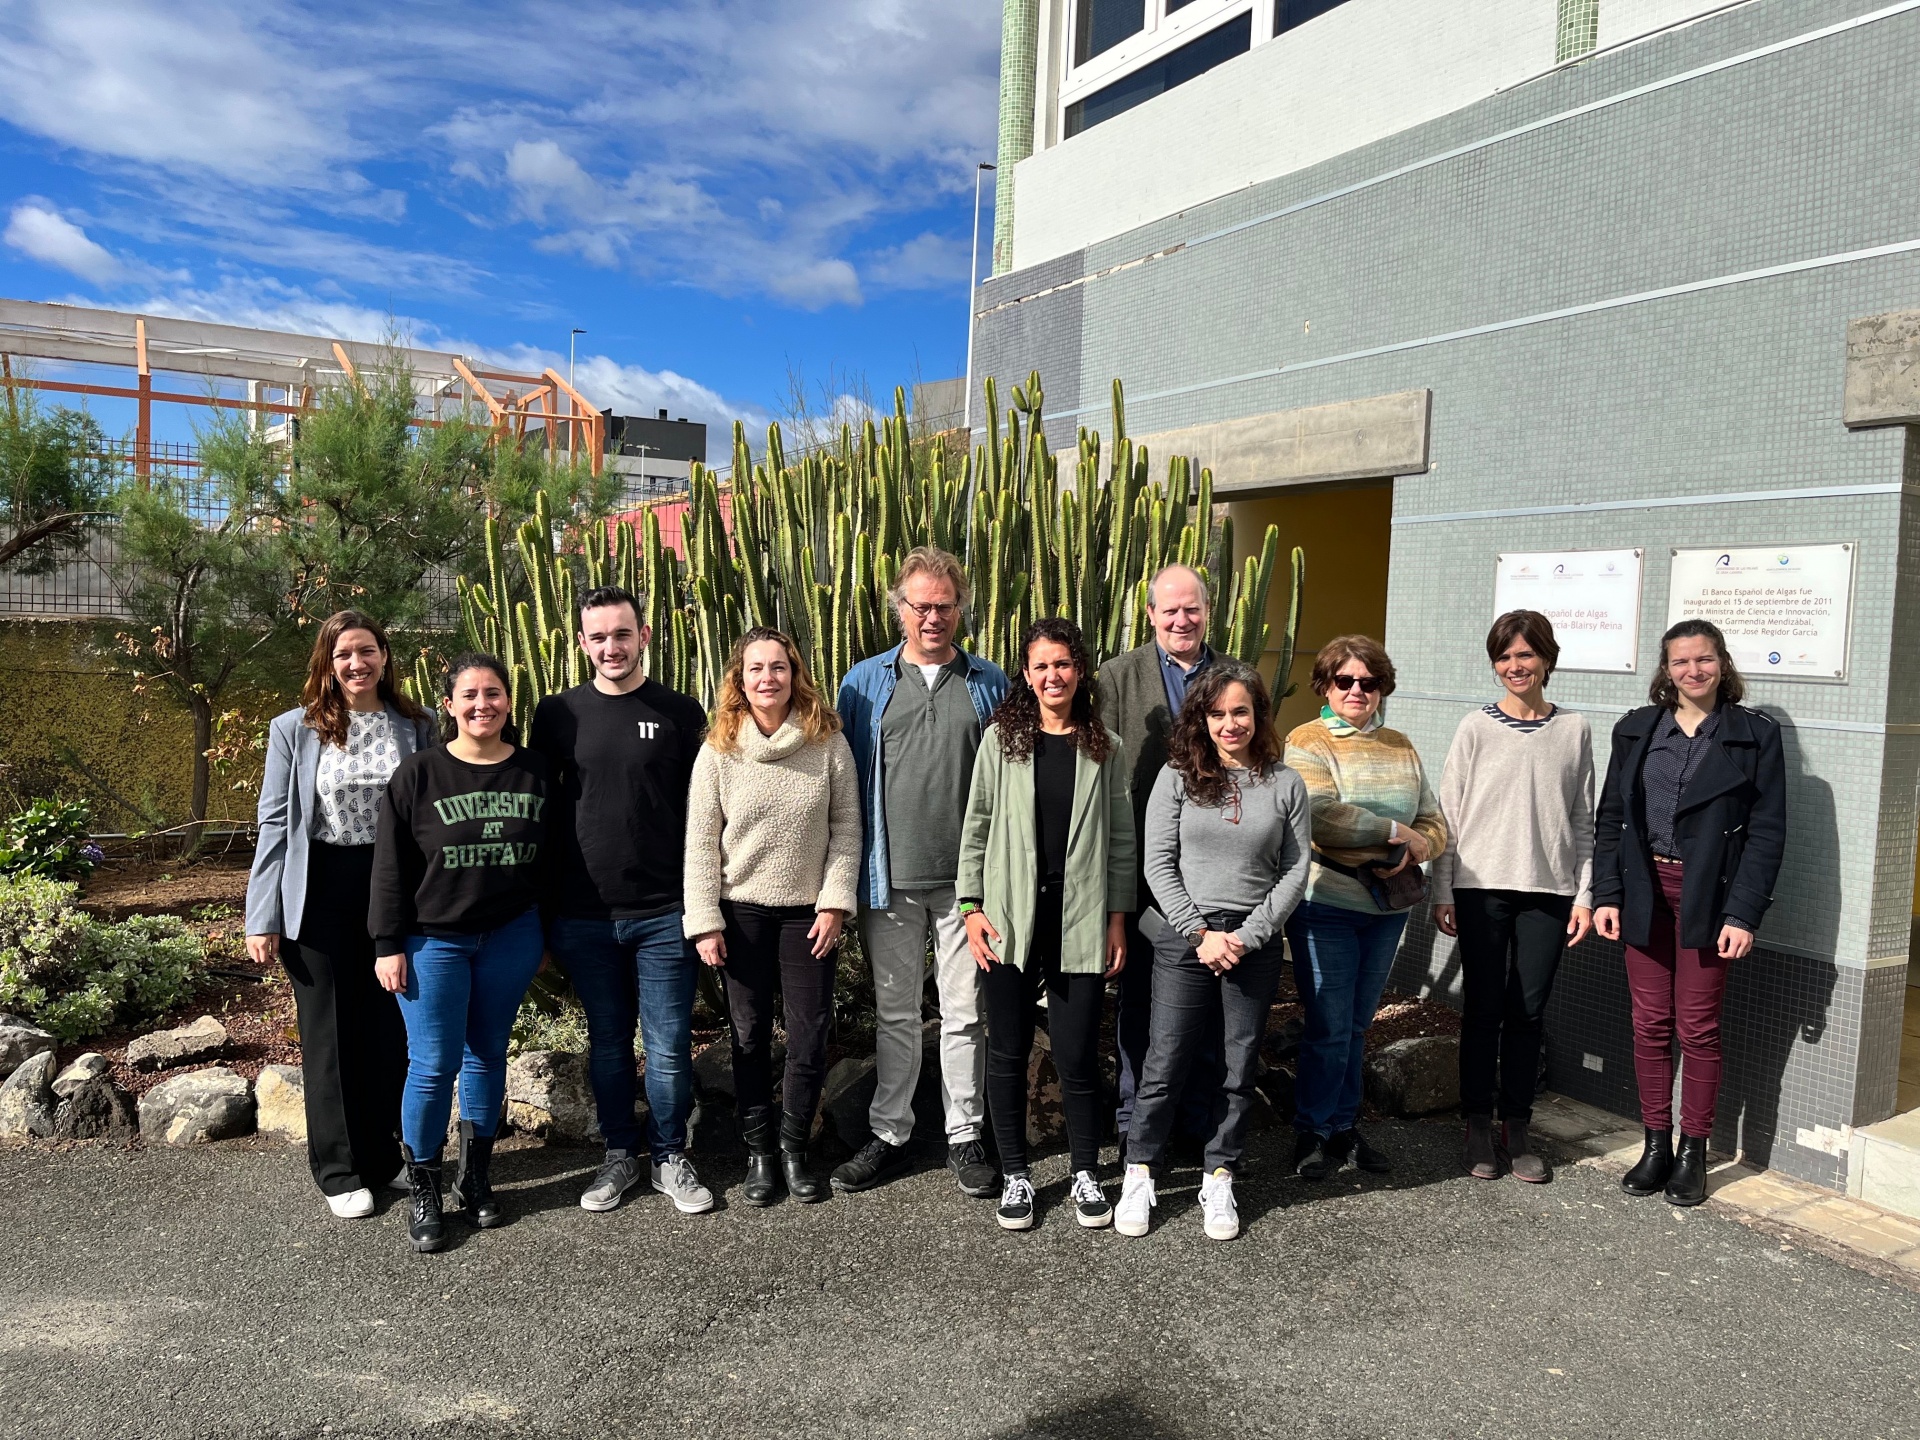 The IU-ECOAQUA organises within the framework of the INTEGRATE project a workshop on nutrient flow in Integrated Multi-trophic Aquaculture